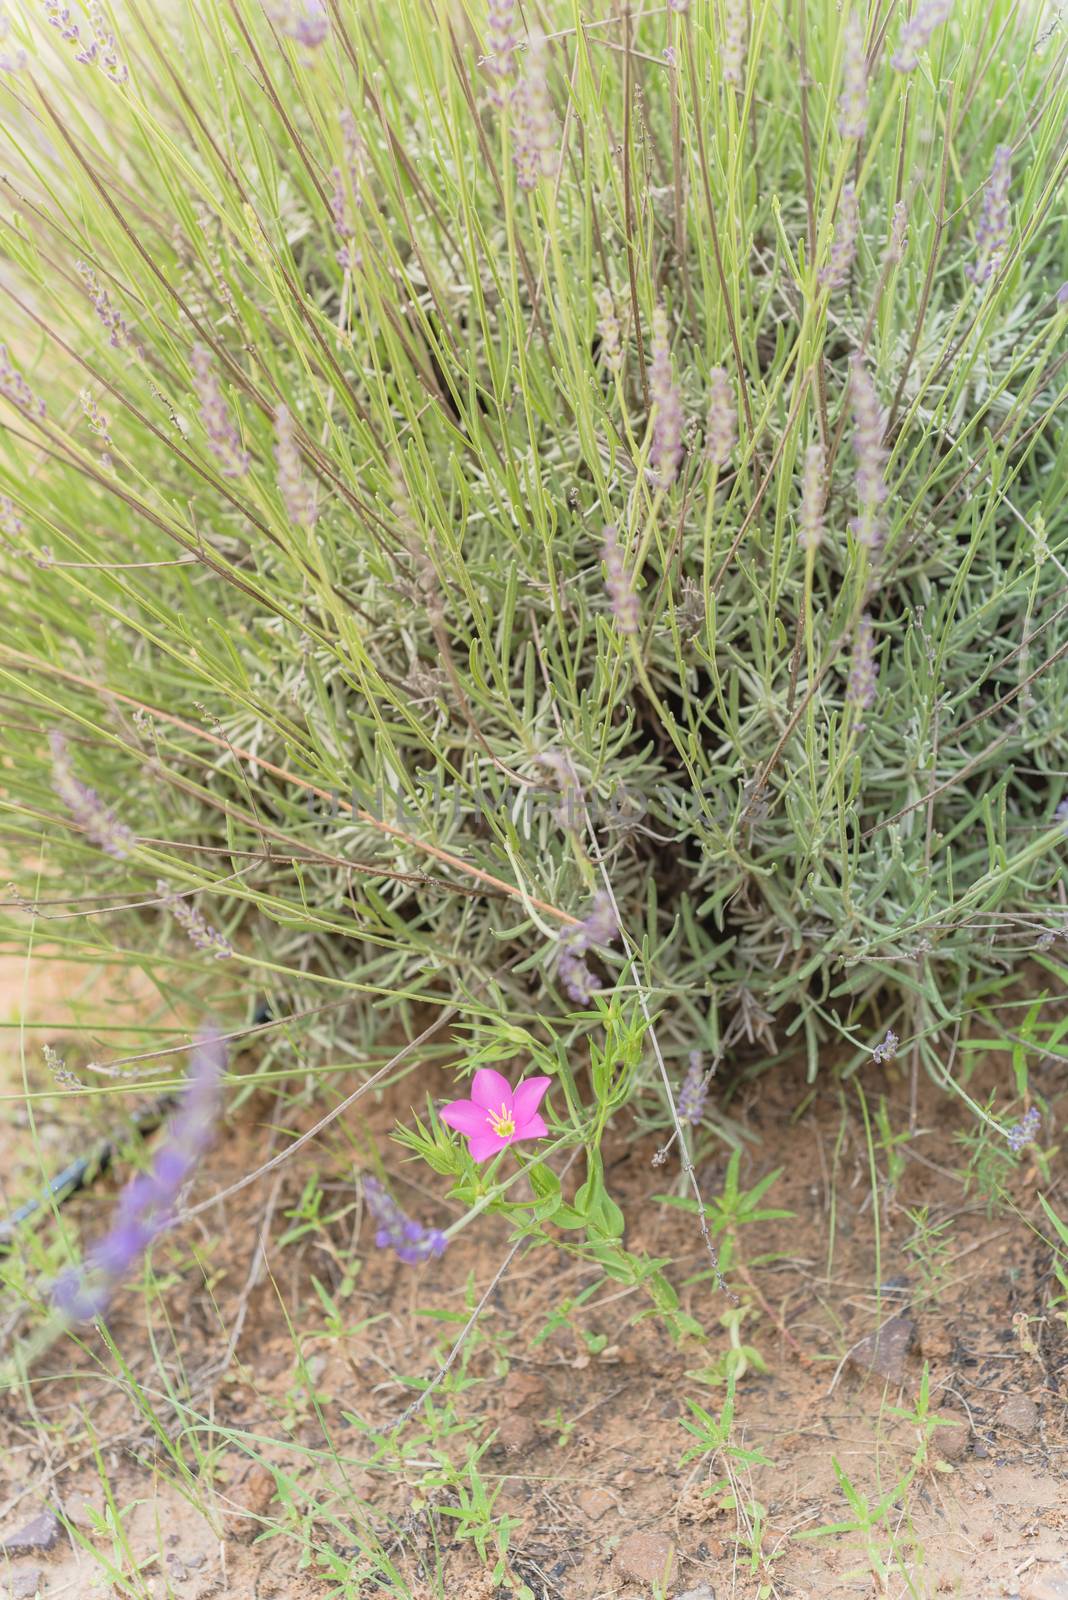 Wild flower and lavender bush at organic farm near Dallas, Texas, USA with warm sunset light. Close-up view blooming lavender flower